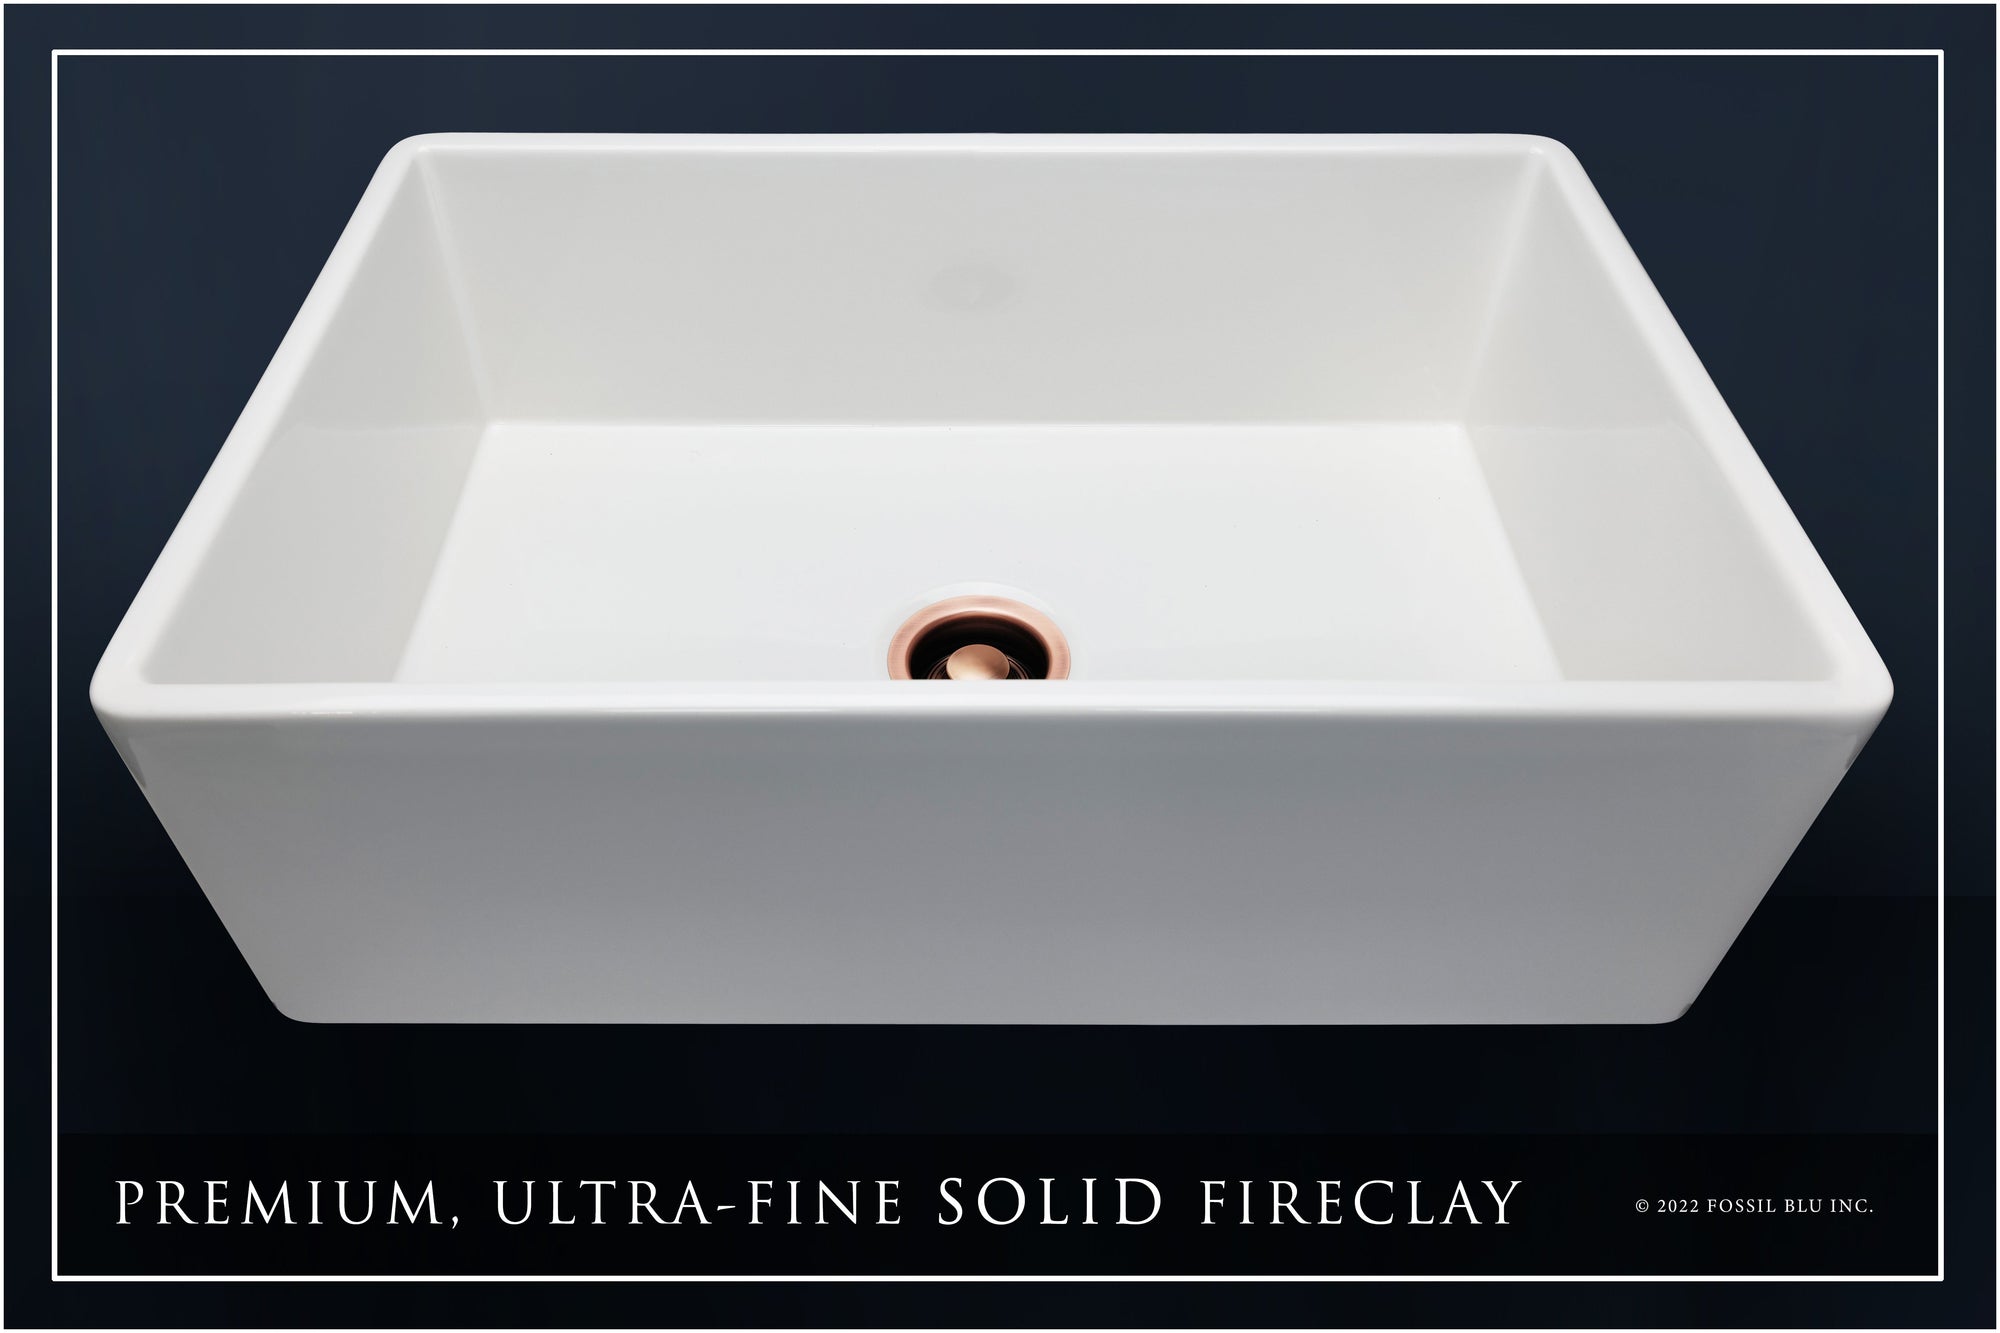 FSW1002AC LUXURY 33-INCH SOLID FIRECLAY FARMHOUSE SINK IN WHITE, ANTIQUE COPPER ACCS, FLAT FRONT